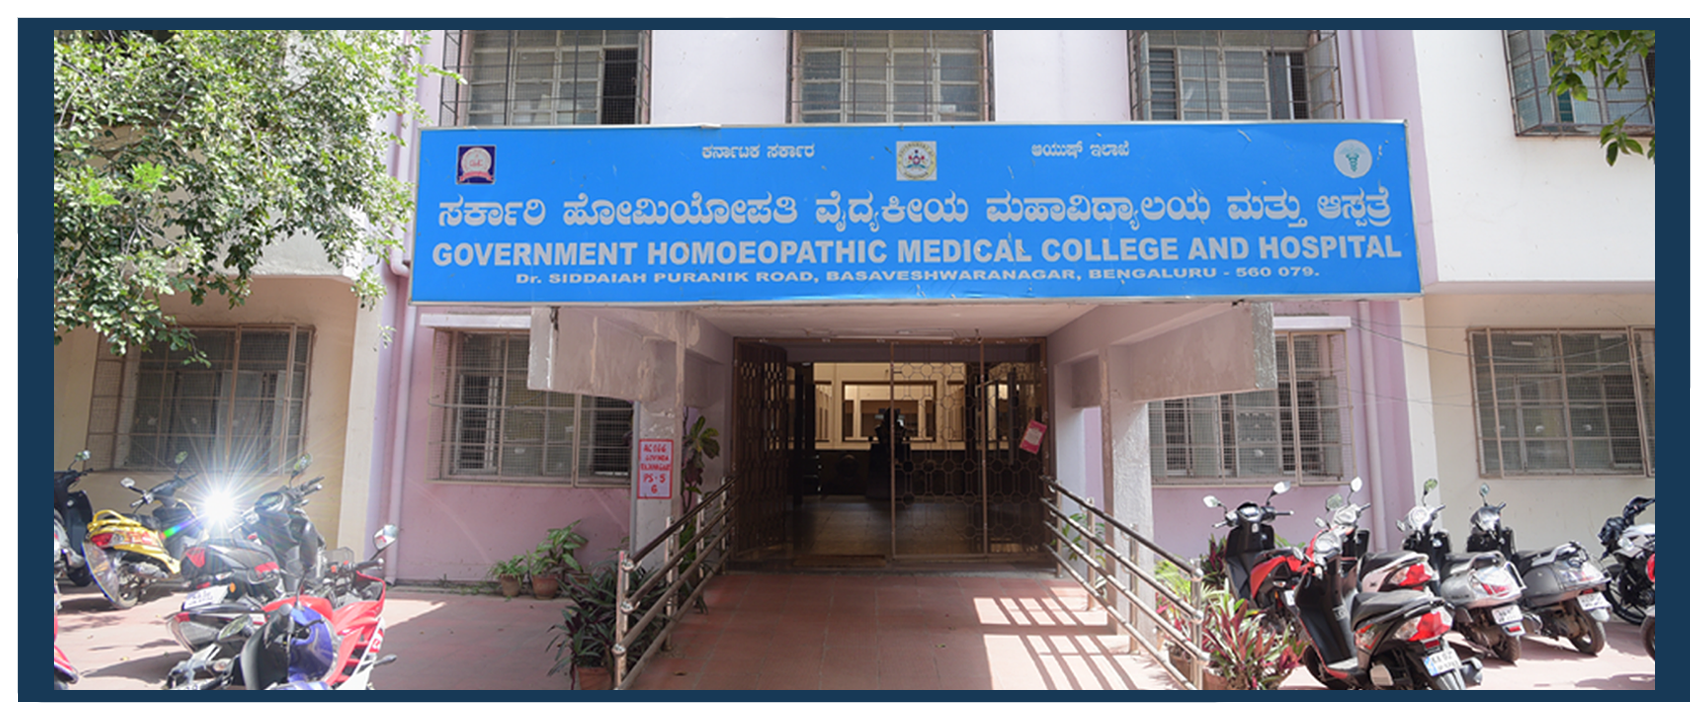 Government Homeopathic Medical College Bangalore Admission, Courses, Fees, Internships